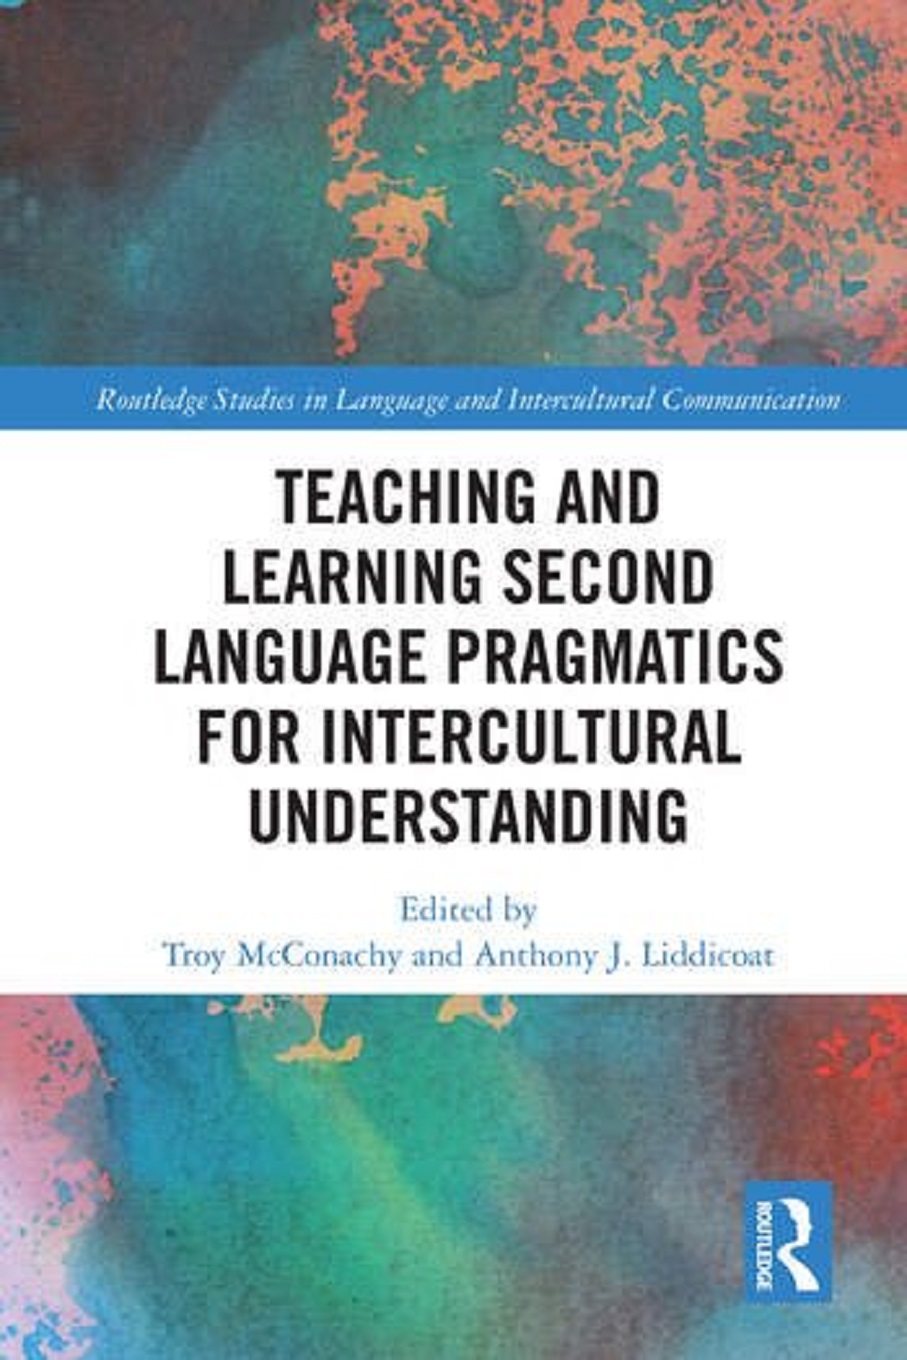 Teaching and Learning Second Language Pragmatics for Intercultural Understanding